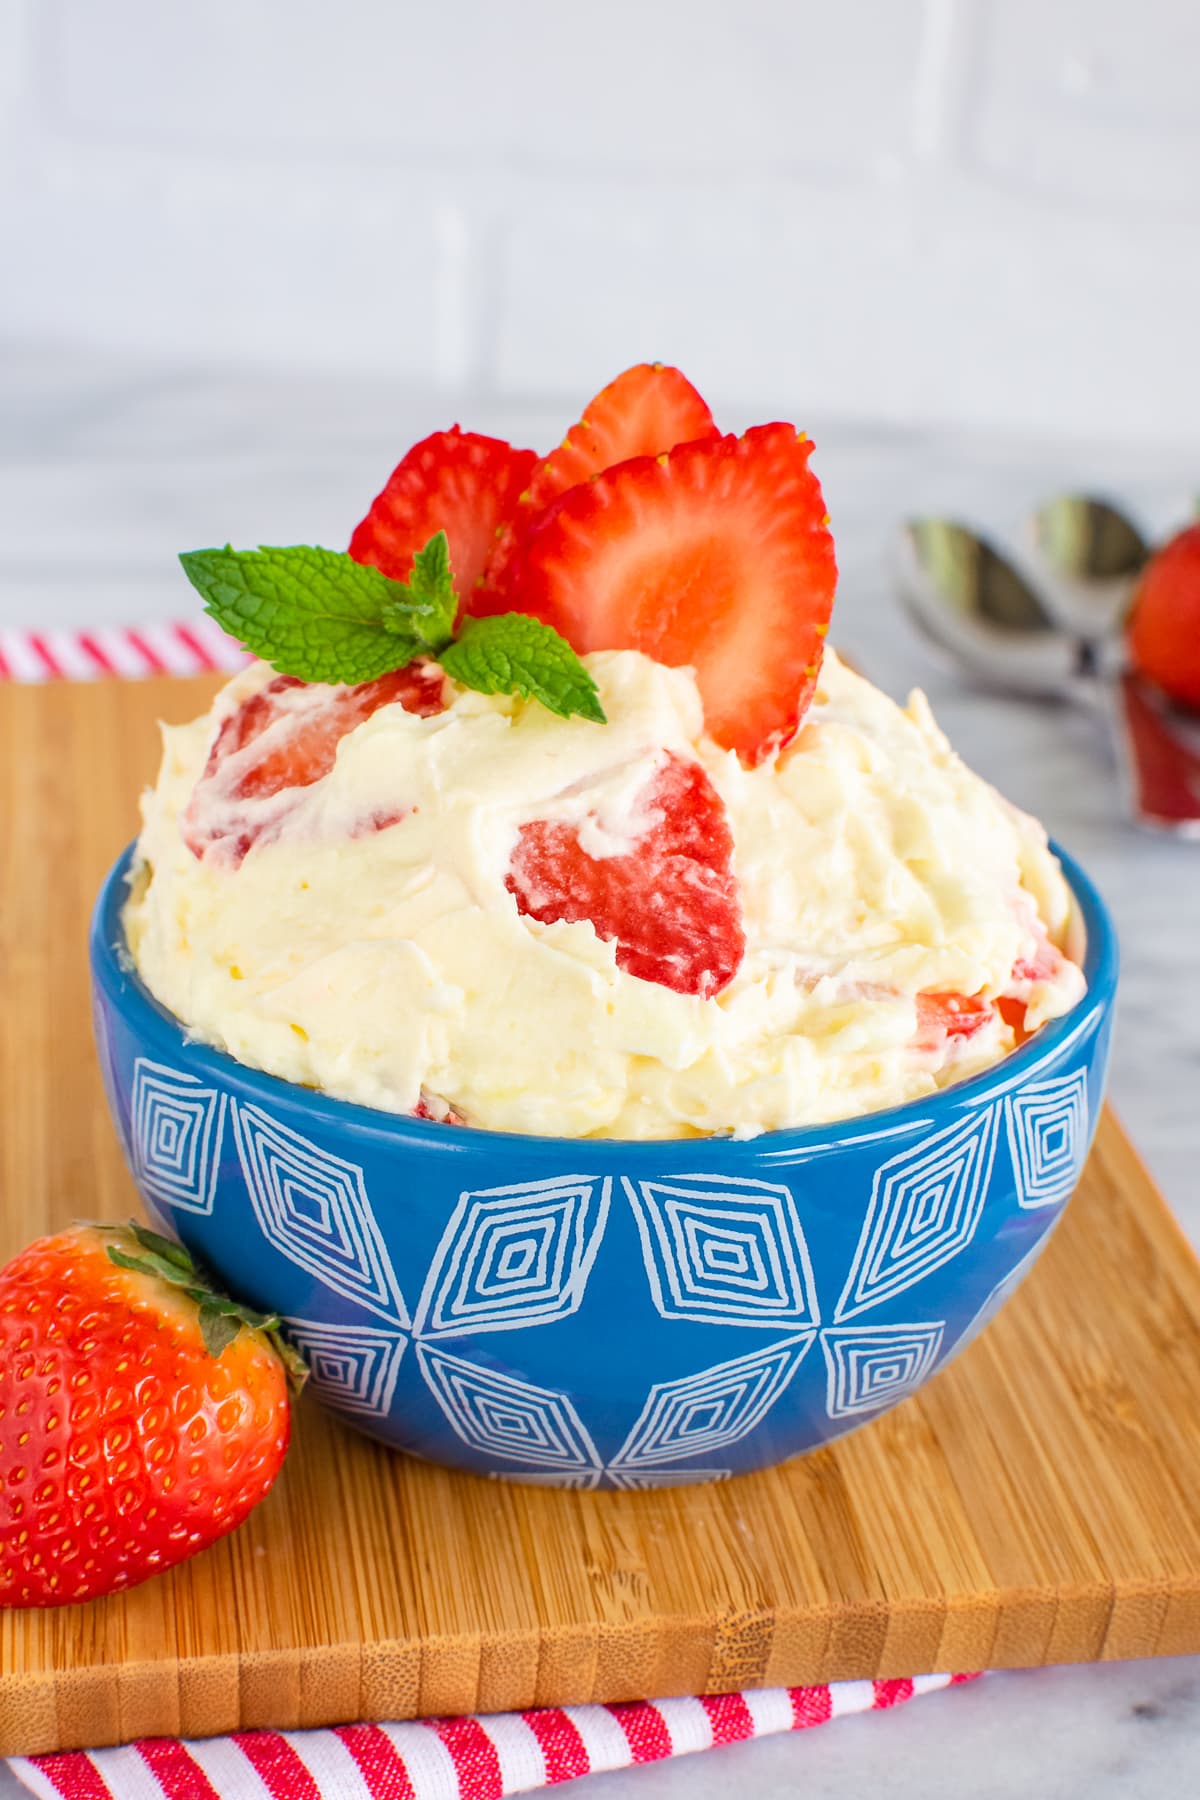 A blue bowl filled with lemon fluff and sliced strawberries.